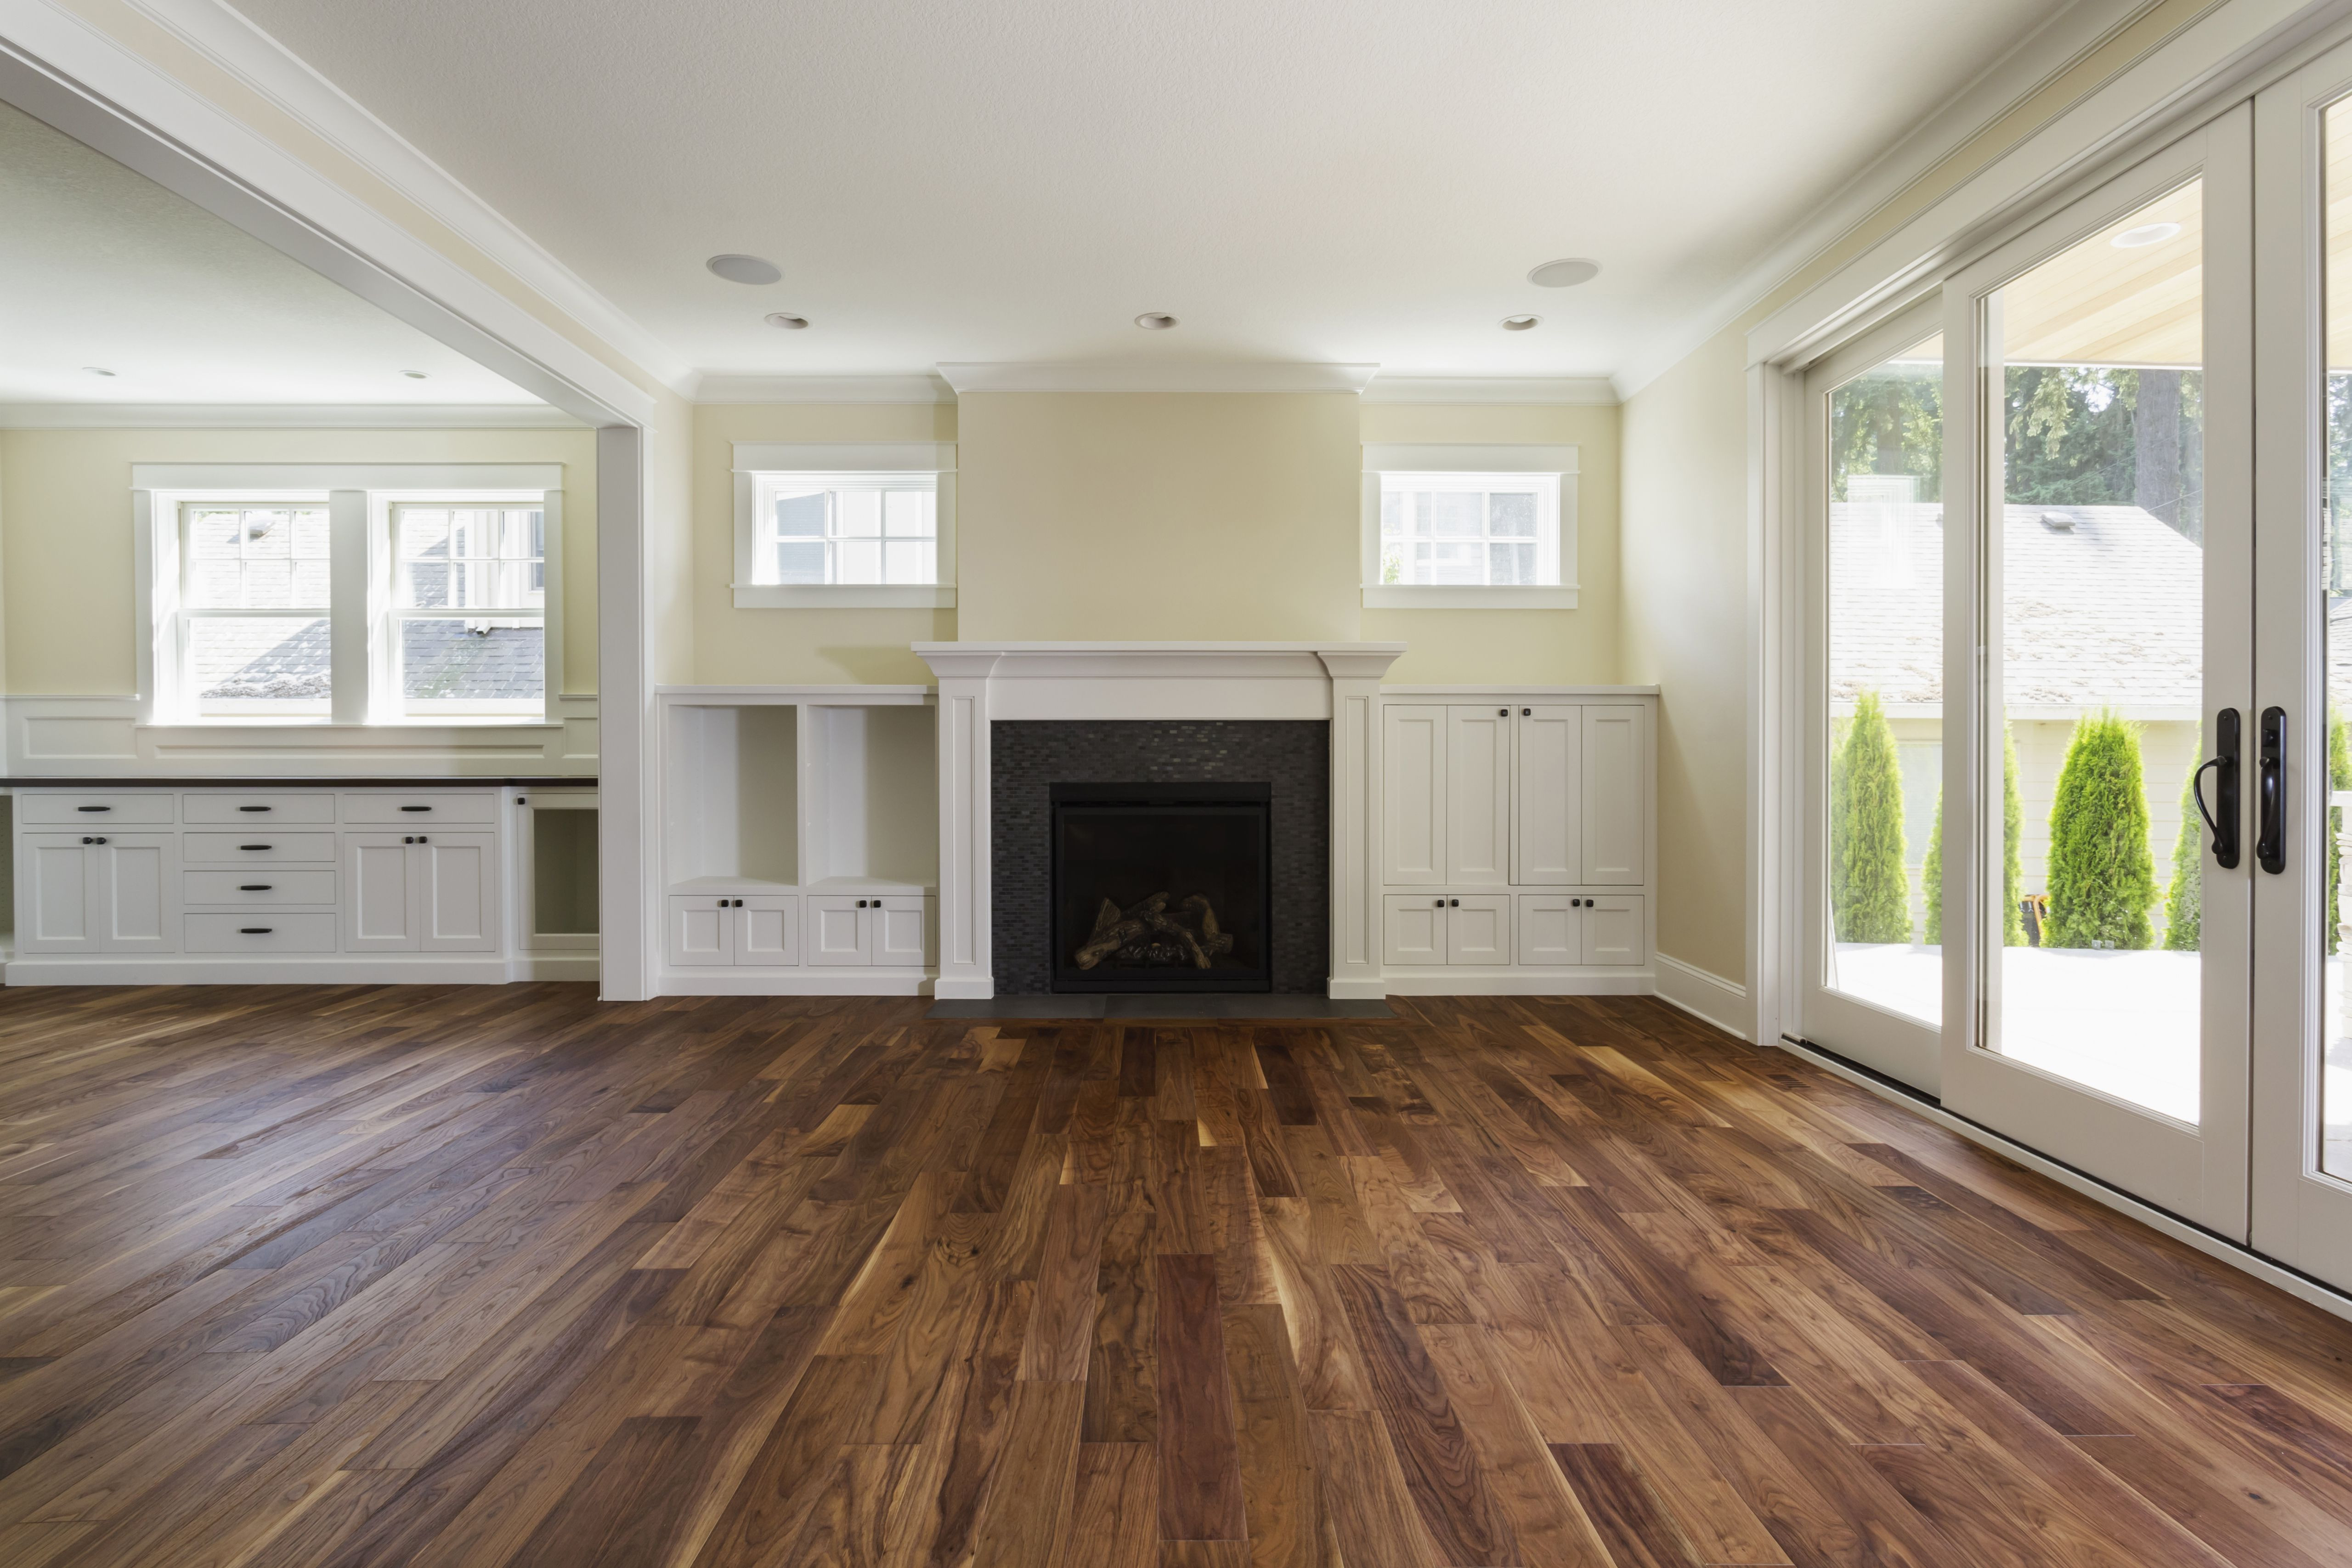 11 Lovable Prefinished Hardwood Flooring Lowes 2024 free download prefinished hardwood flooring lowes of how to install wood floors the pros and cons of prefinished hardwood throughout how to install wood floors the pros and cons of prefinished hardwood fl